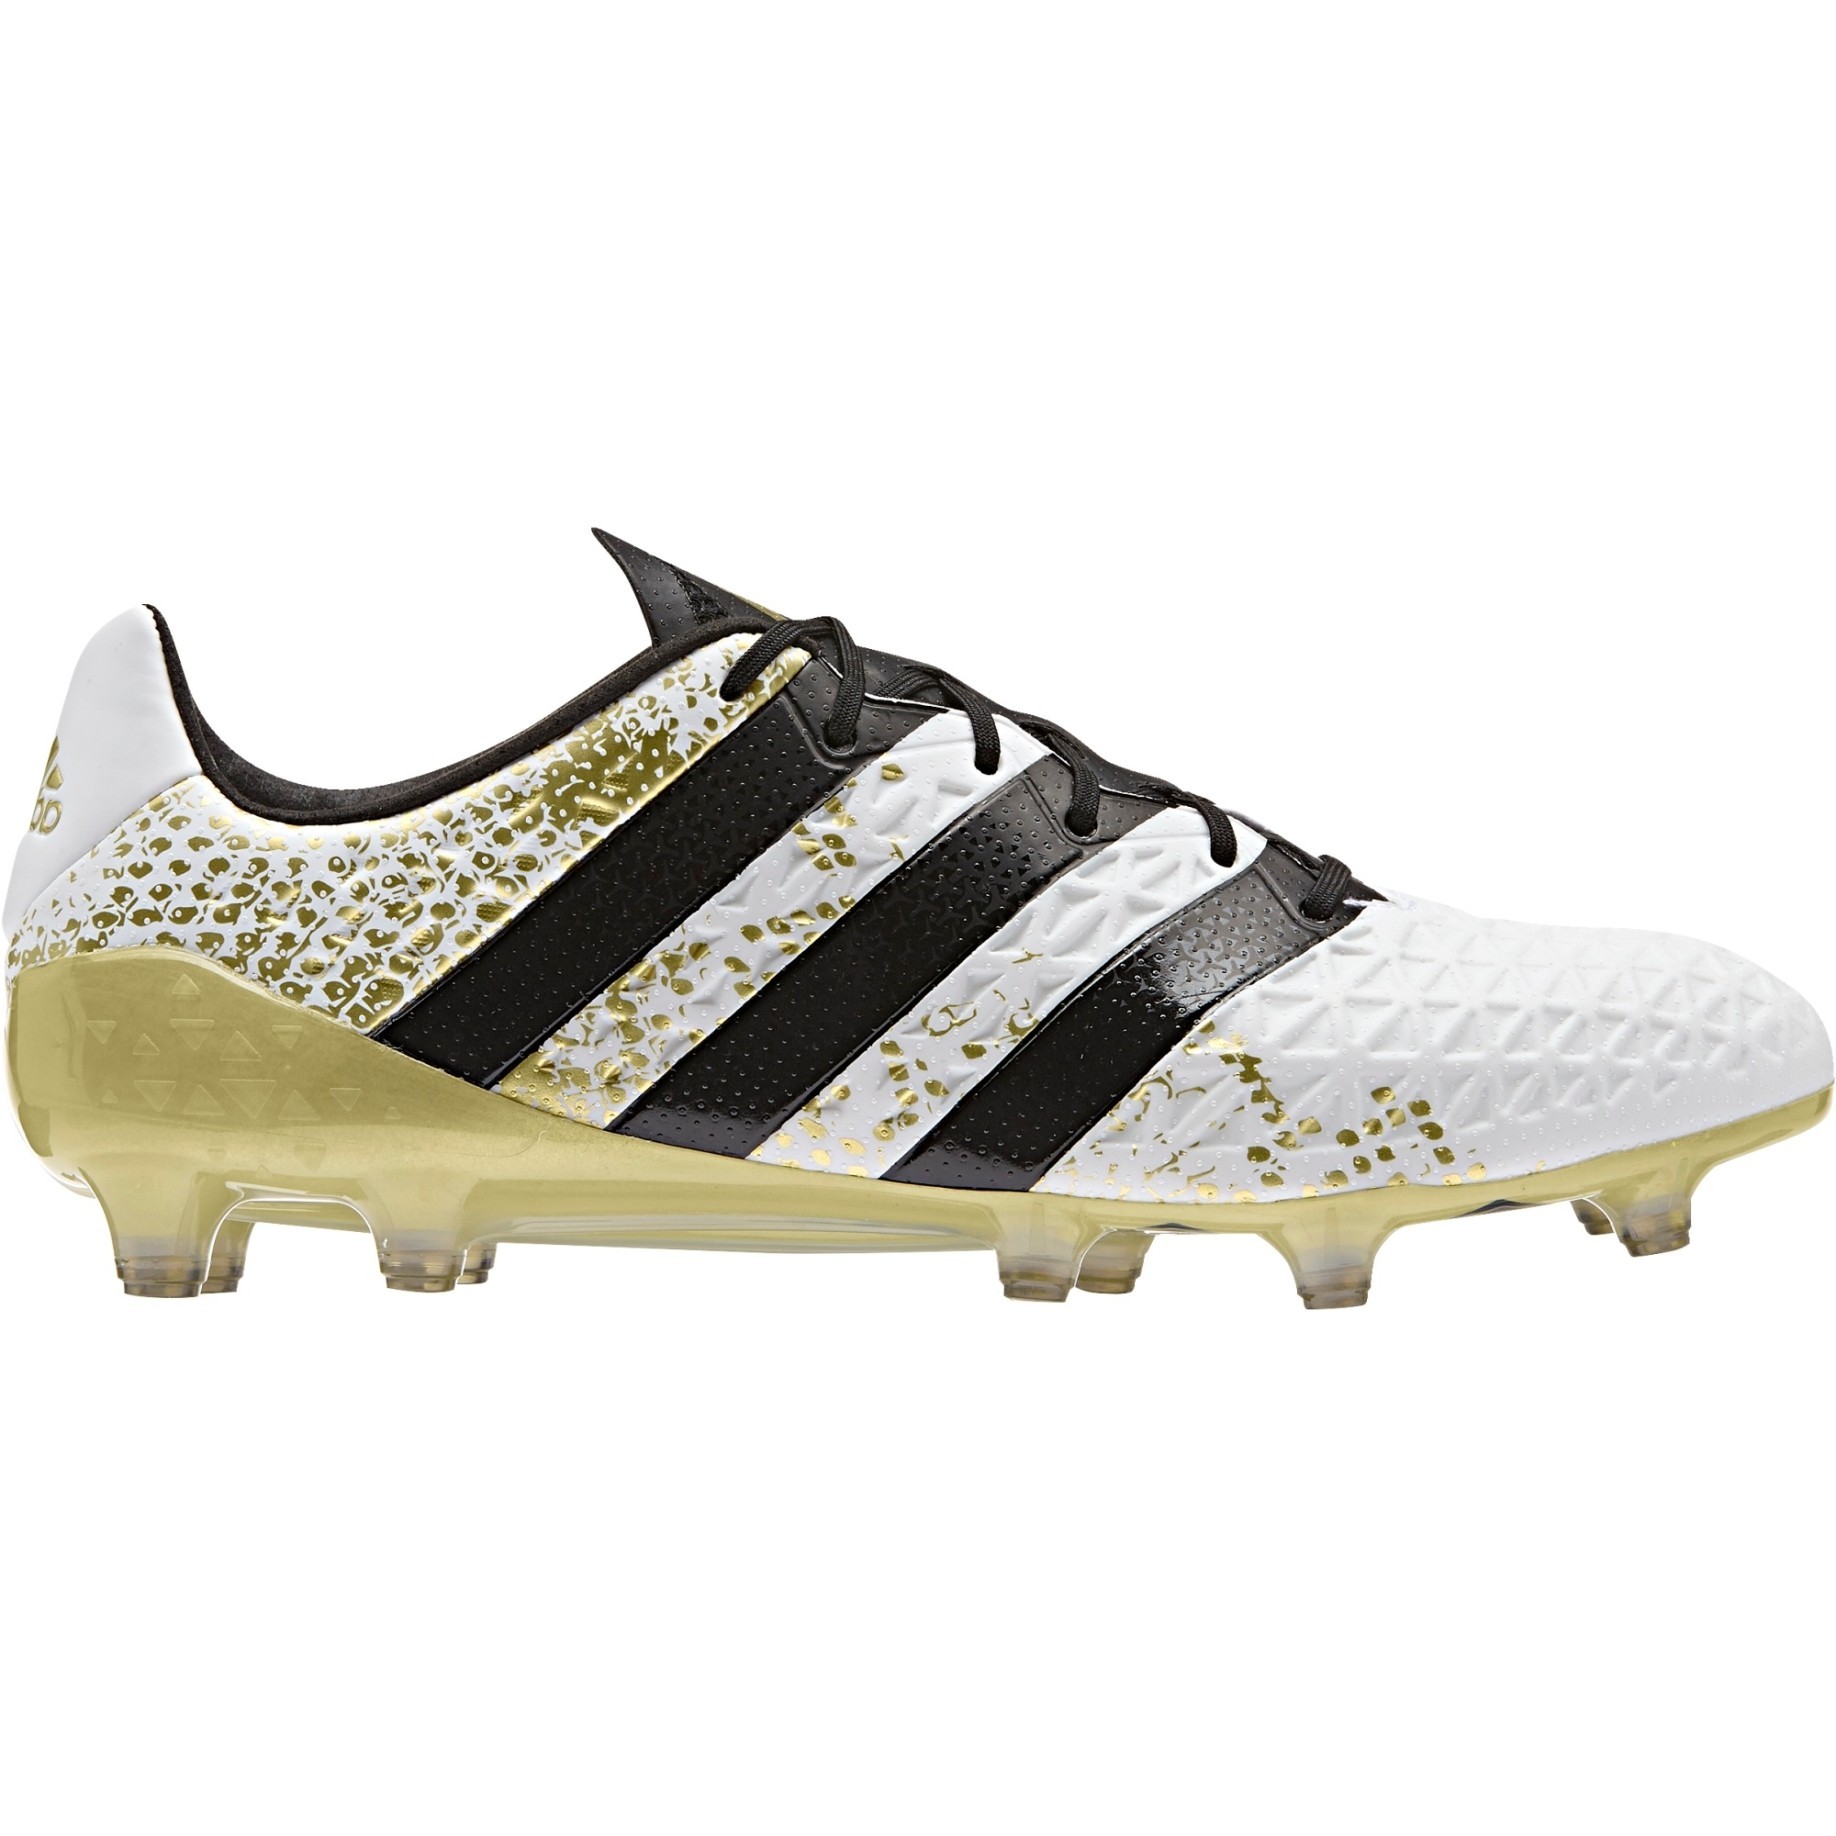 adidas ace 16.1 bianche oro